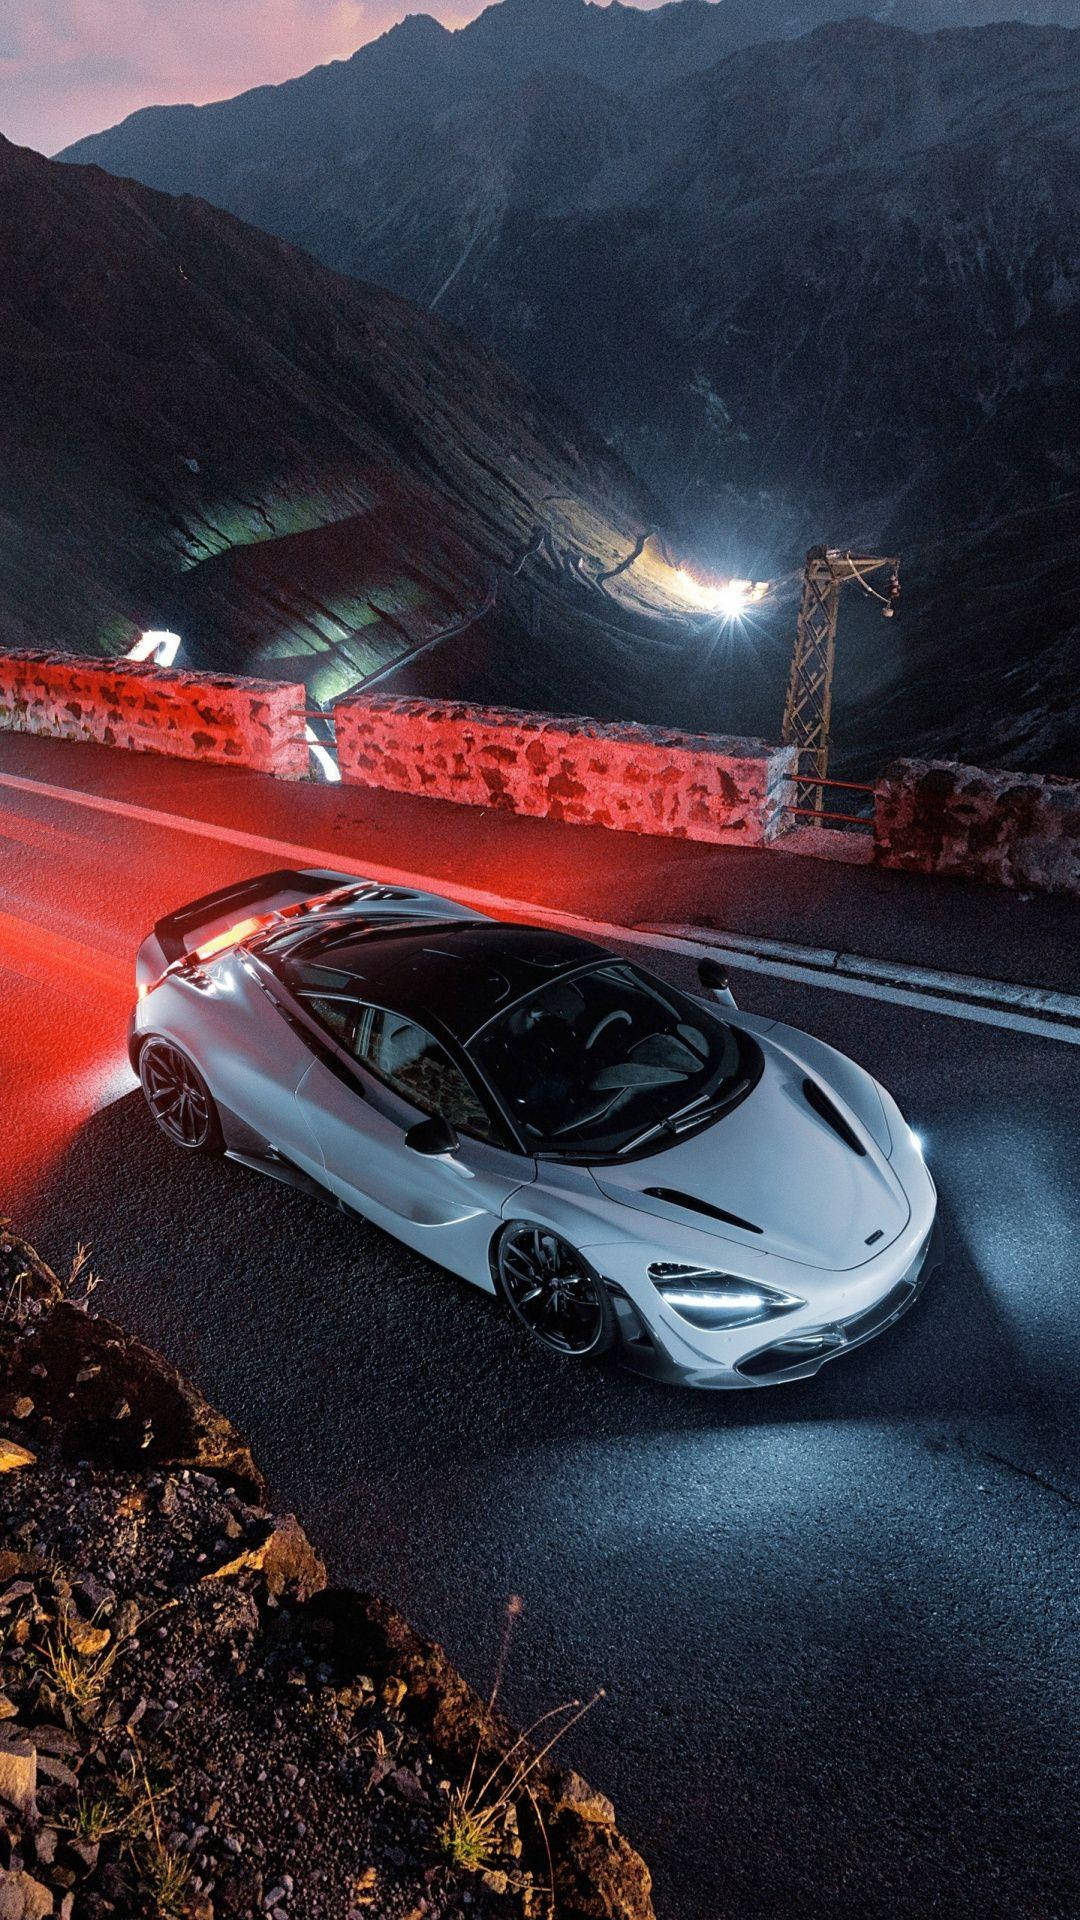 A Mclaren 720s Showcased In All Its Magnificence Under Aesthetic Lighting Background